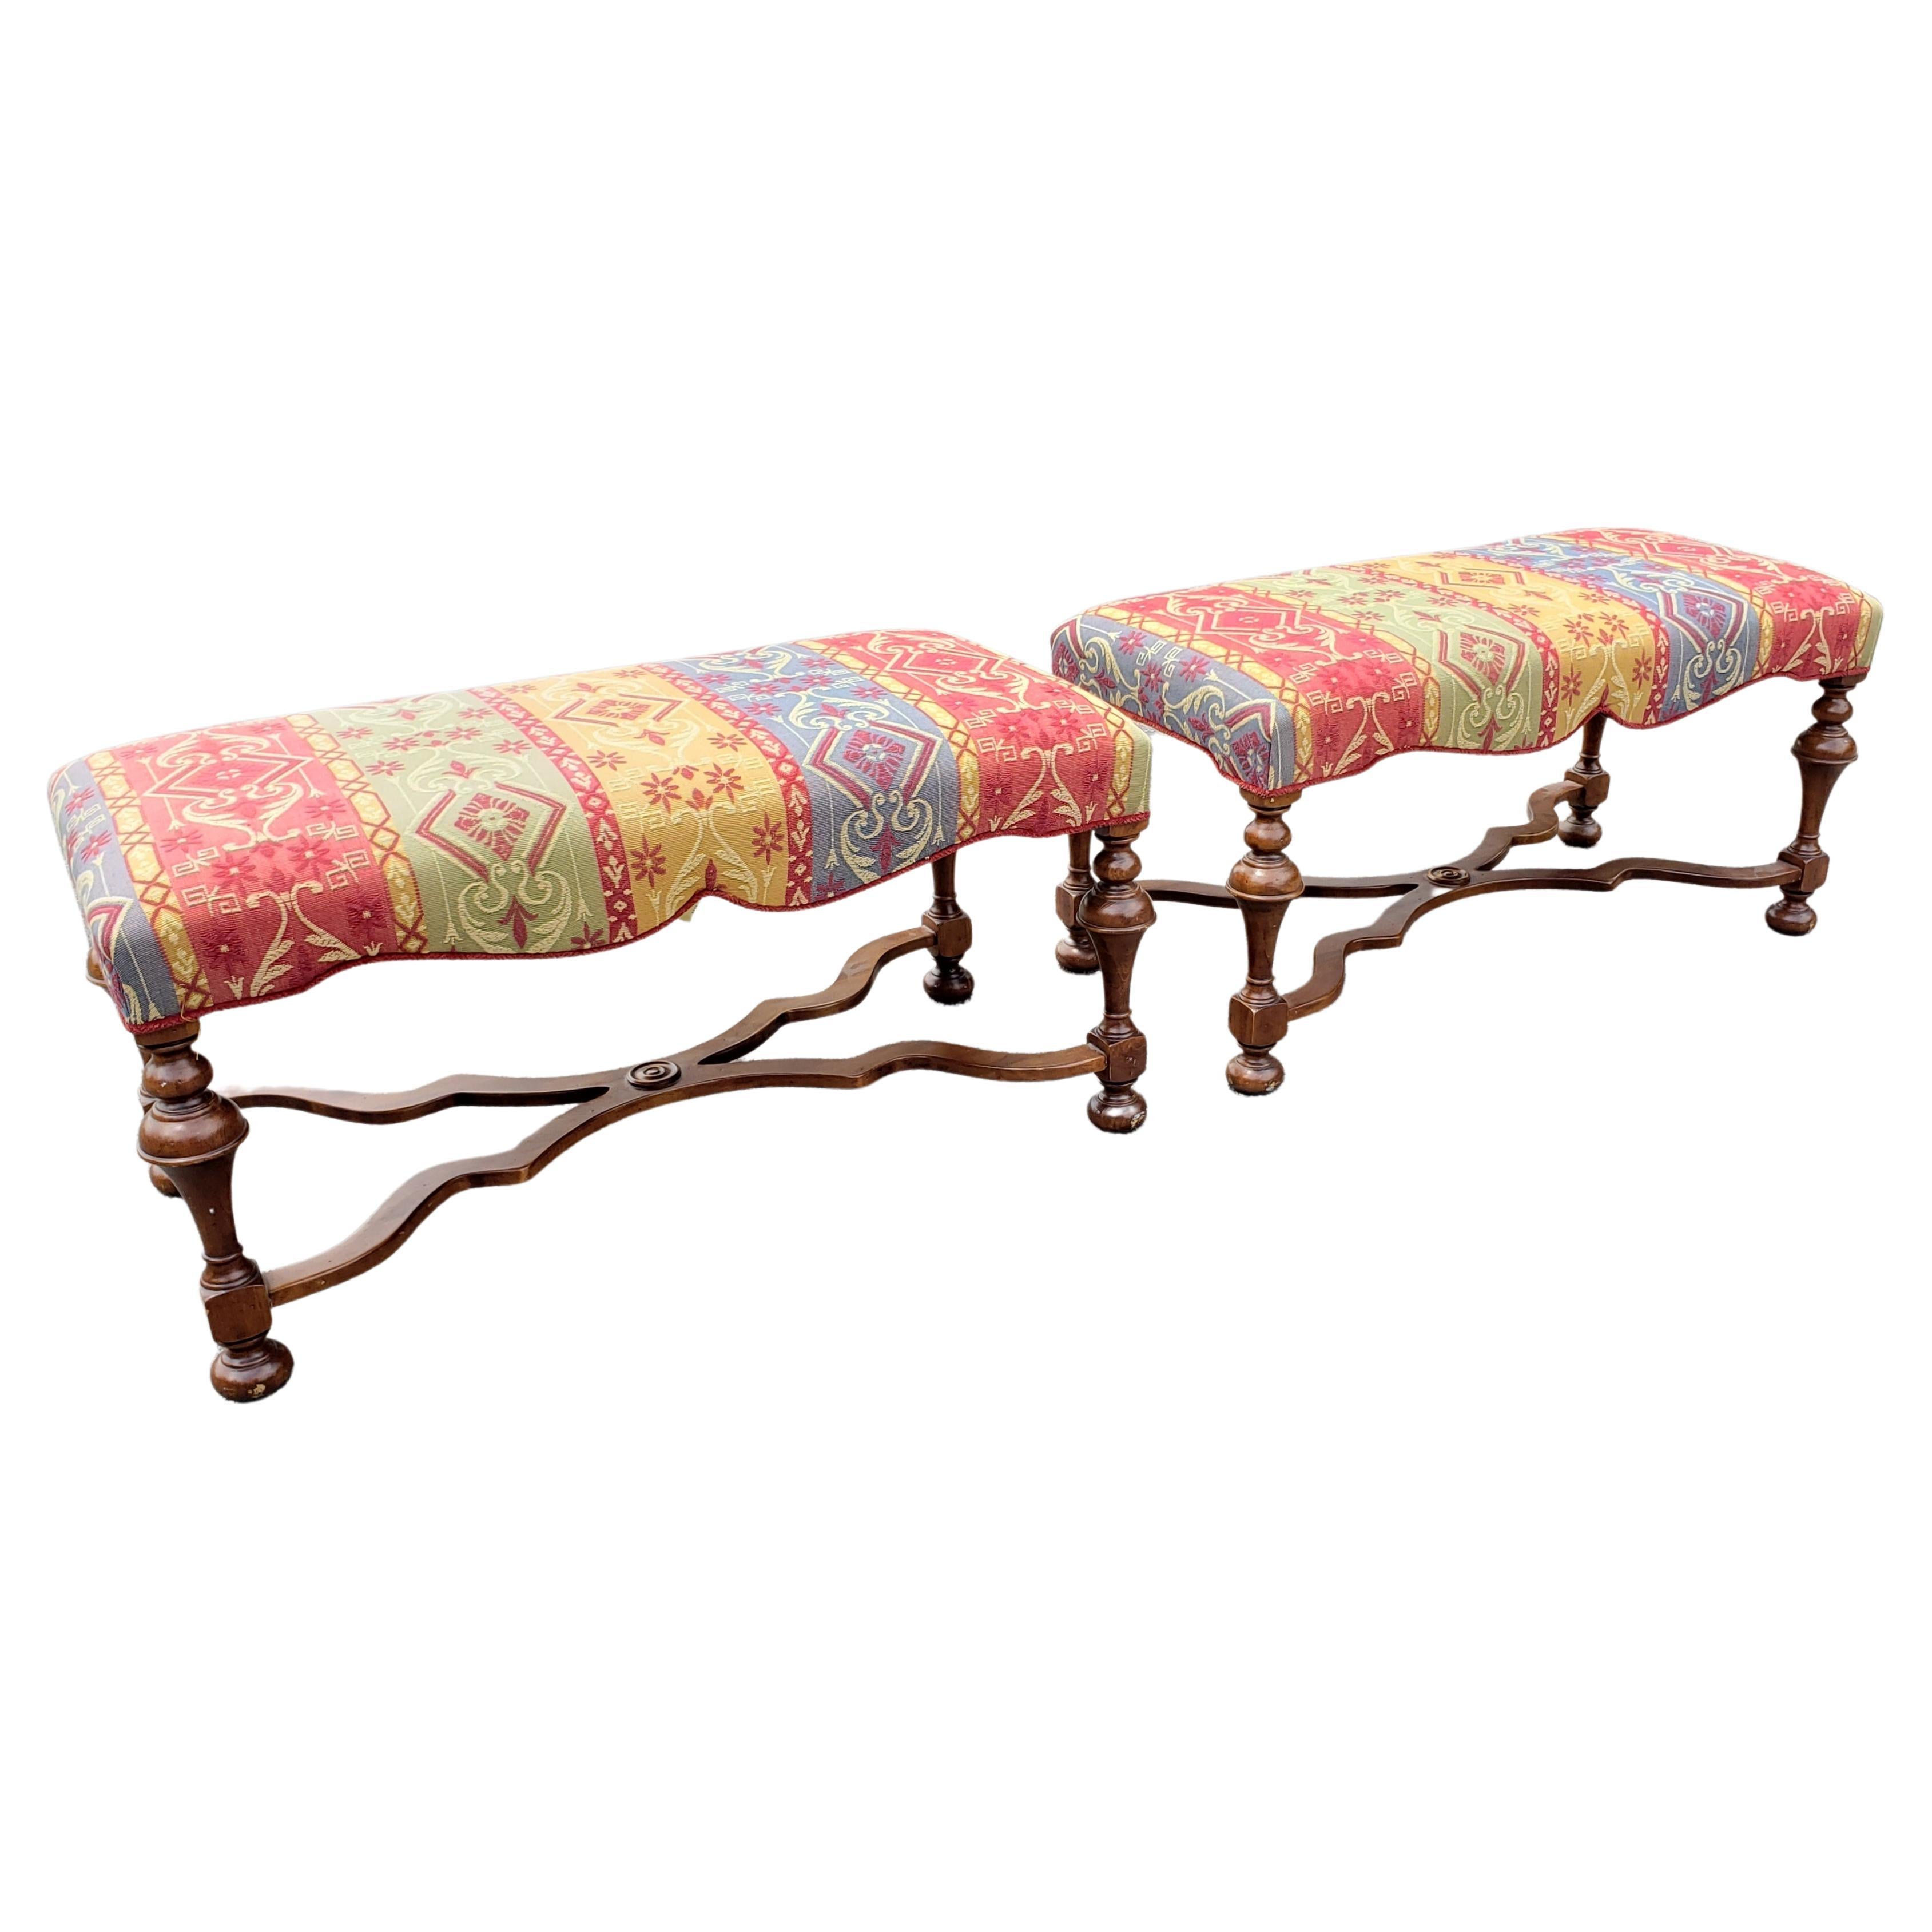 A beautiful pair of Hickory Chair Co. William & Mary Style Upholstered Seat Boudoir Benches in good condition.
Clean upholstery in very good shape. 
Measures 28